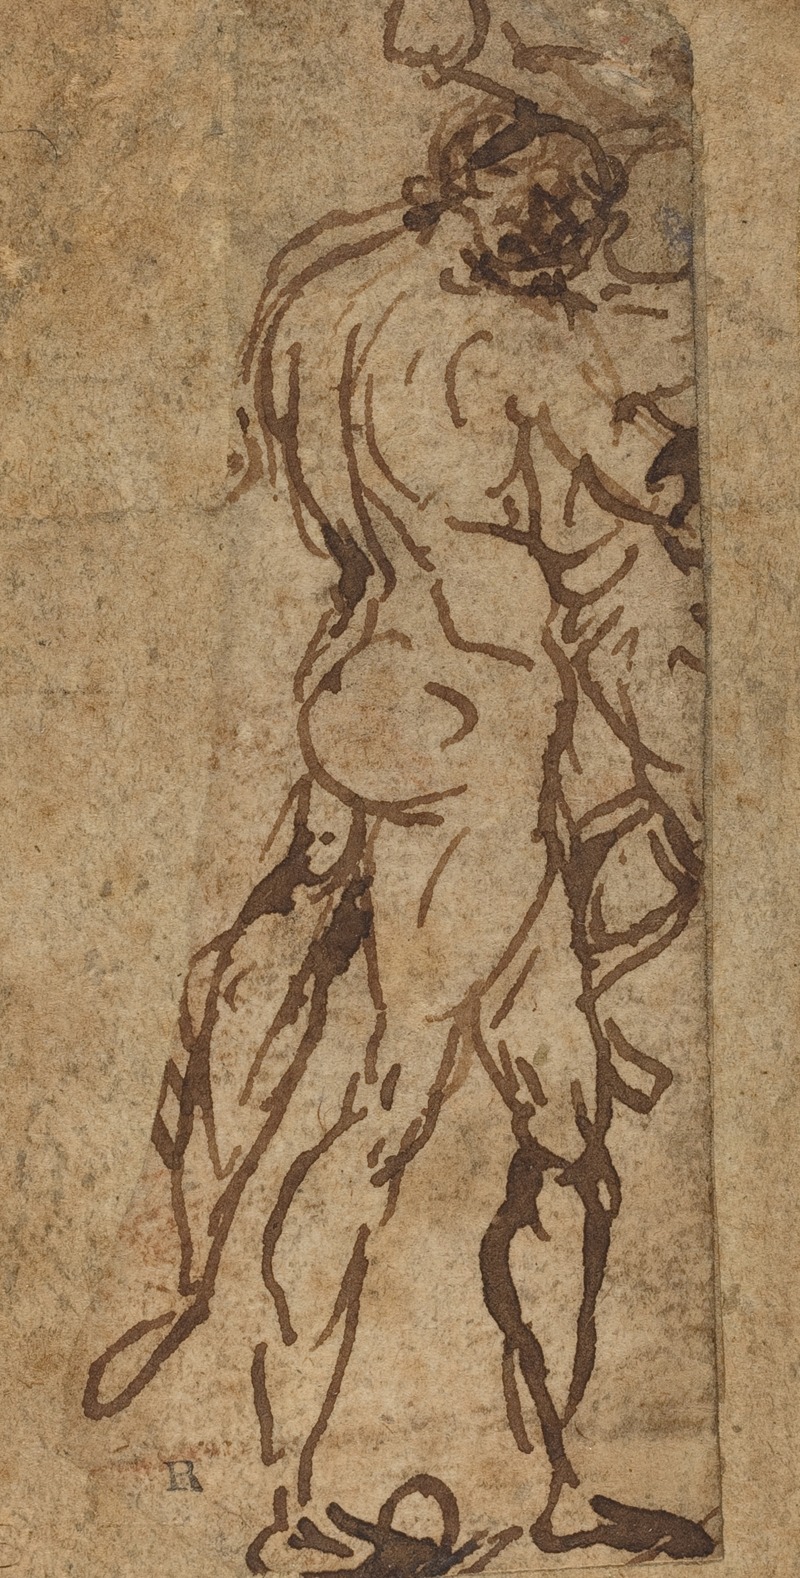 Michelangelo - Two Nudes Fighting